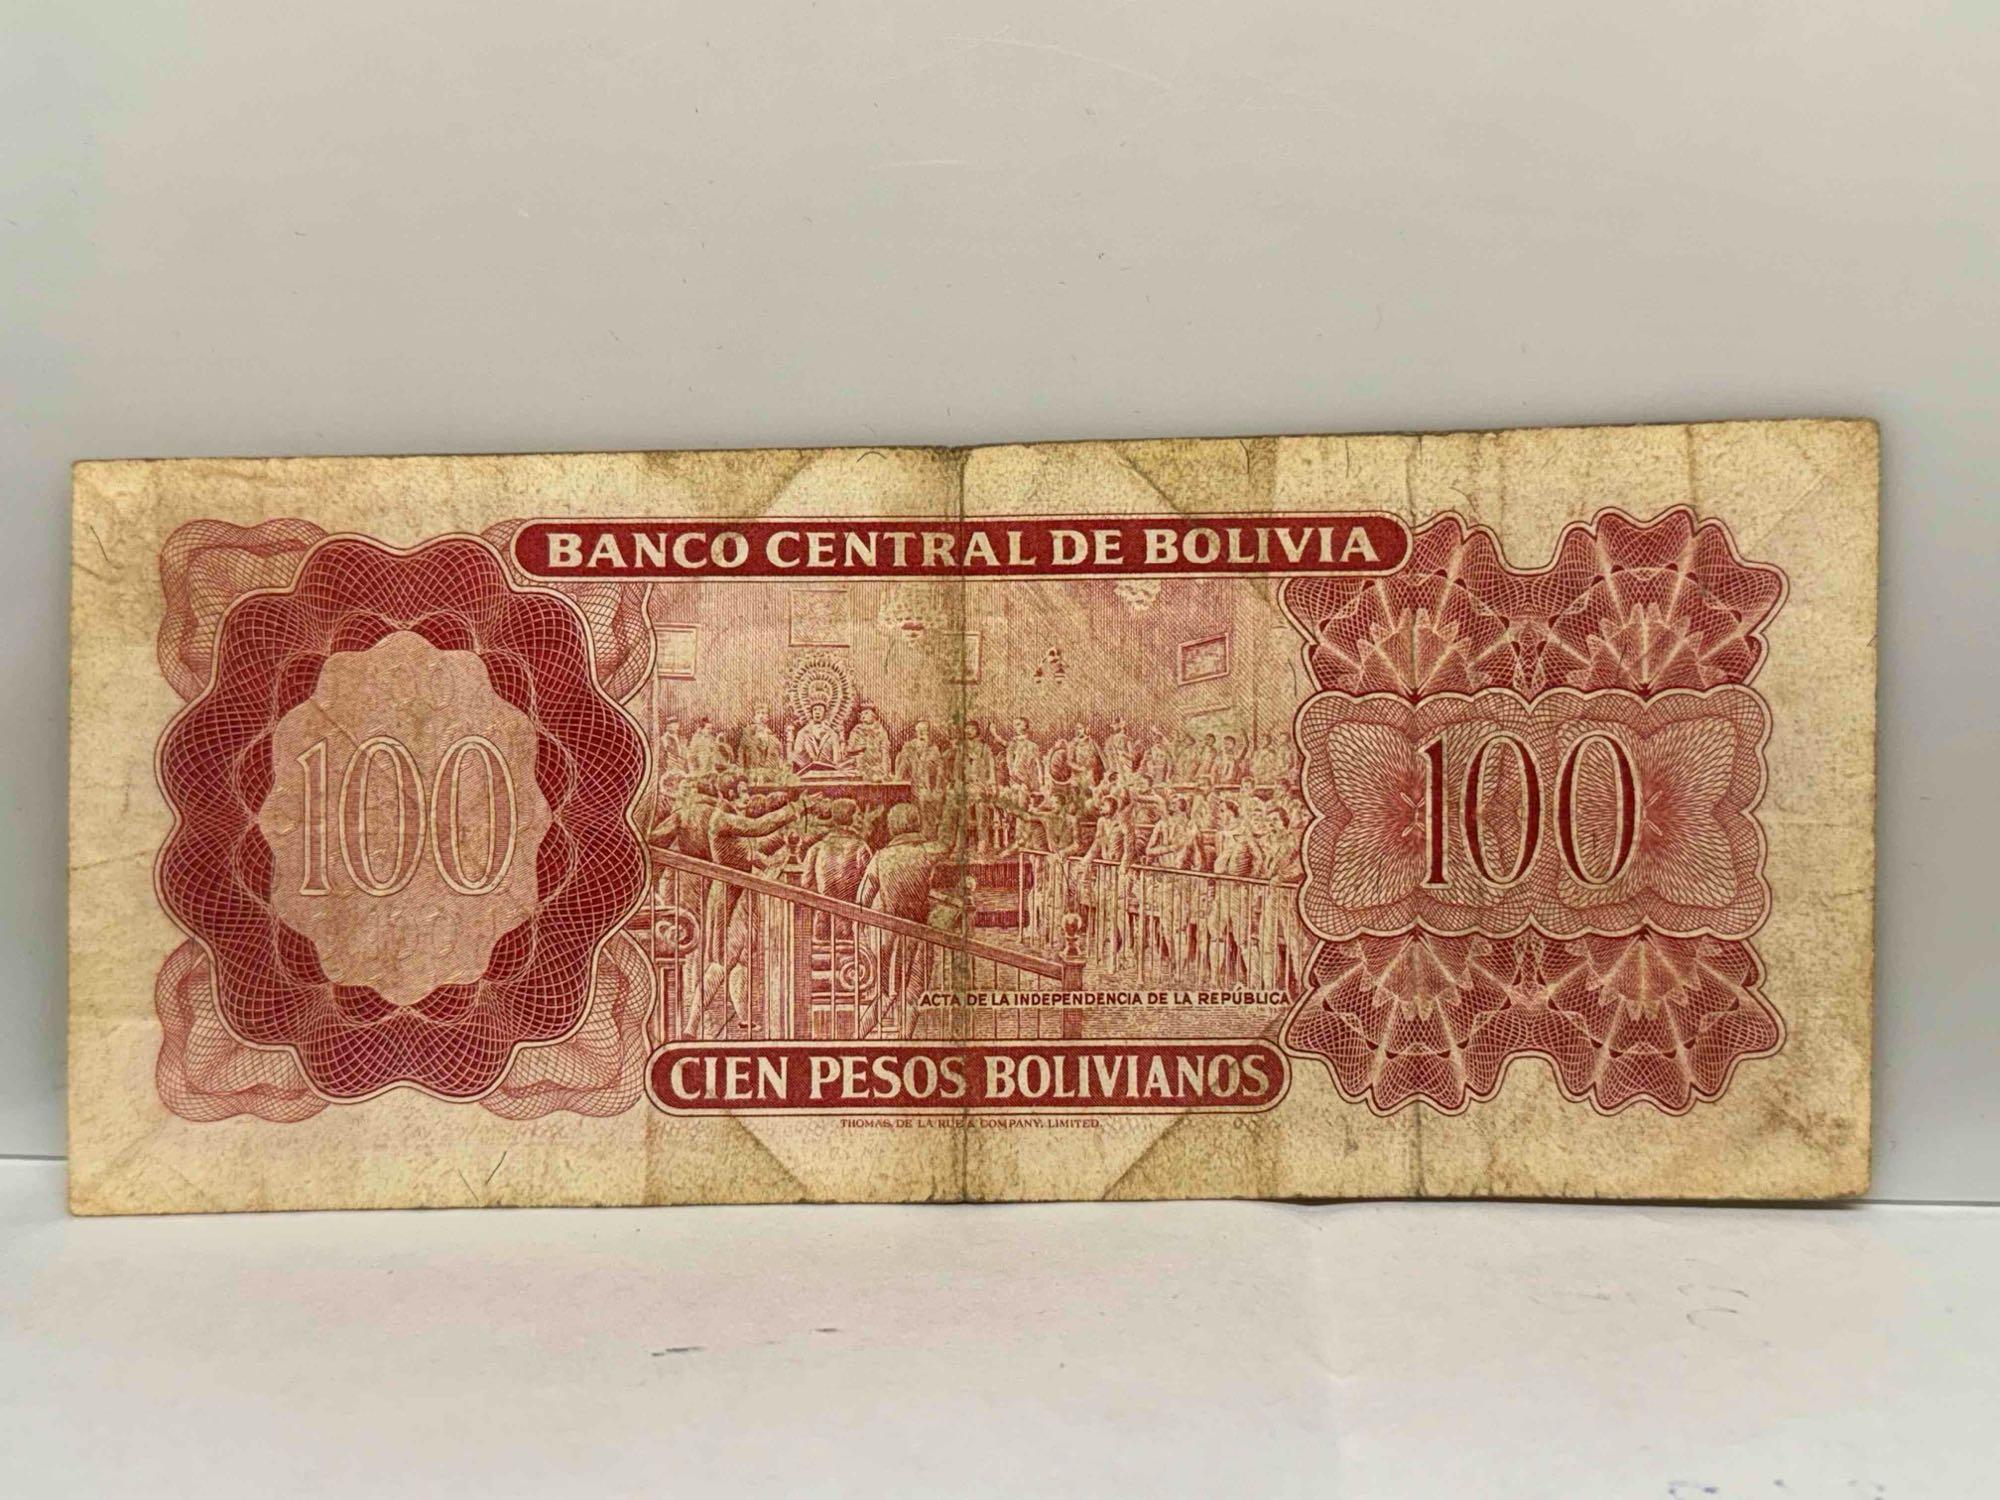 3 1962 Banco Central De Bolivia Banknotes from Bolivia Currency